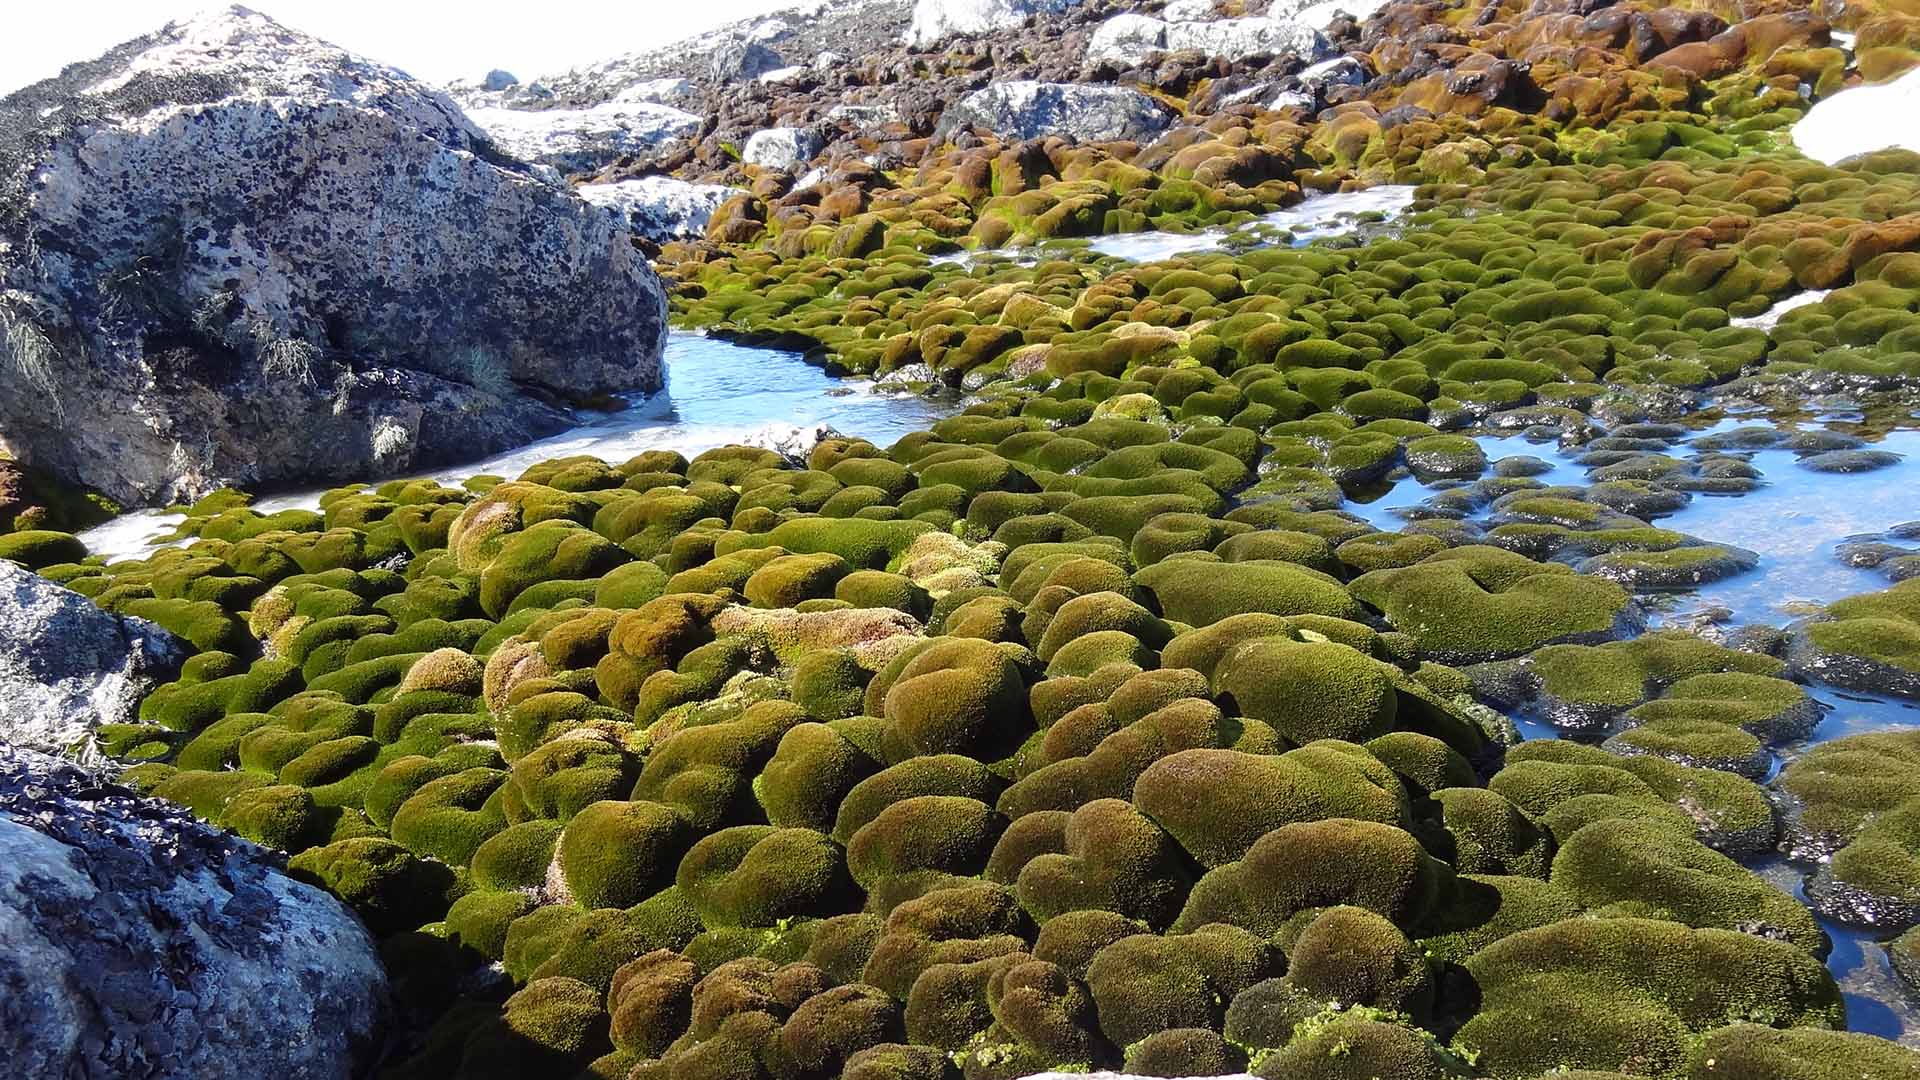 Moss bed in Antarctica near Casey research station